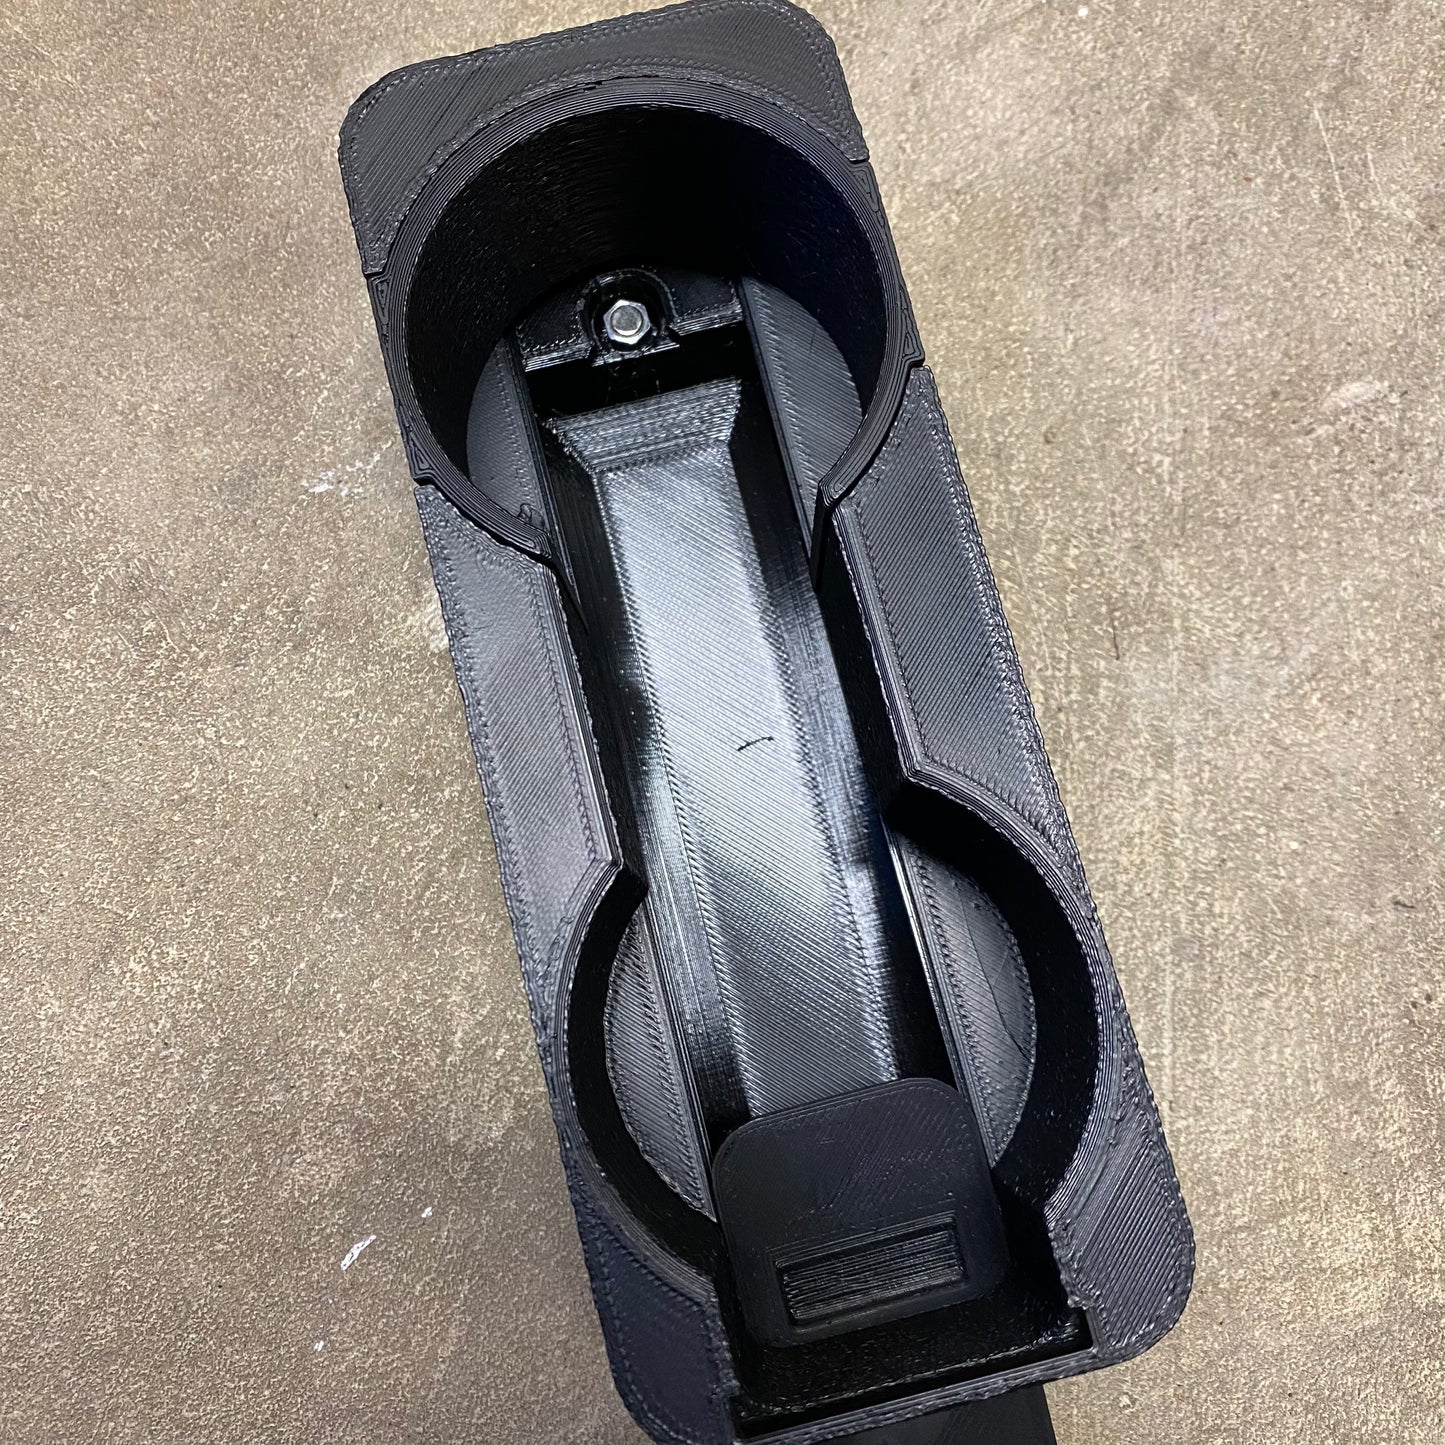 Graveyard #10 - No Compartment Lining - BMW E30 Center Console Cupholder with Hidden Storage